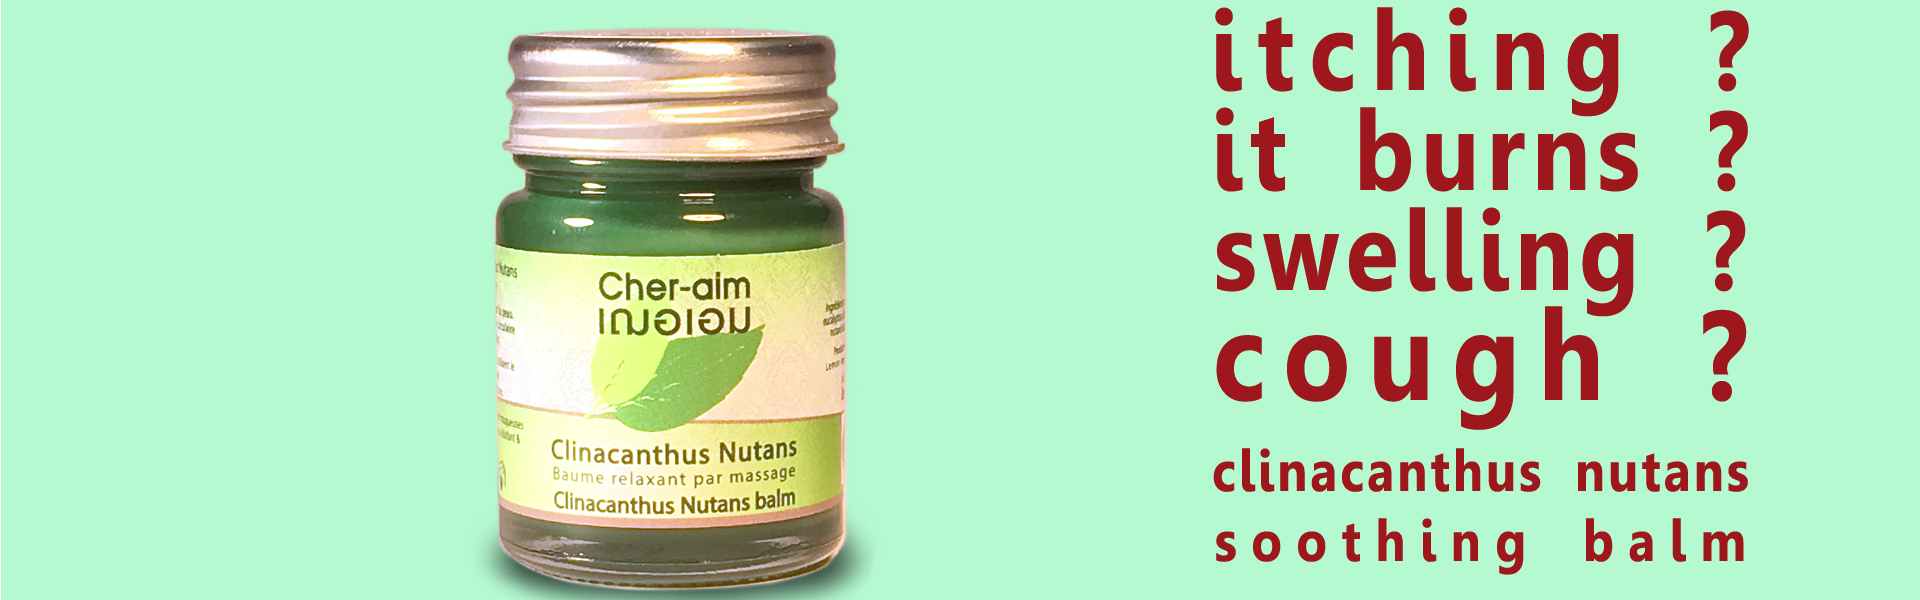 If it is itching, if it burns, if it is swelling, if it is coughing : Clinacanthus Nutans soothing balm.